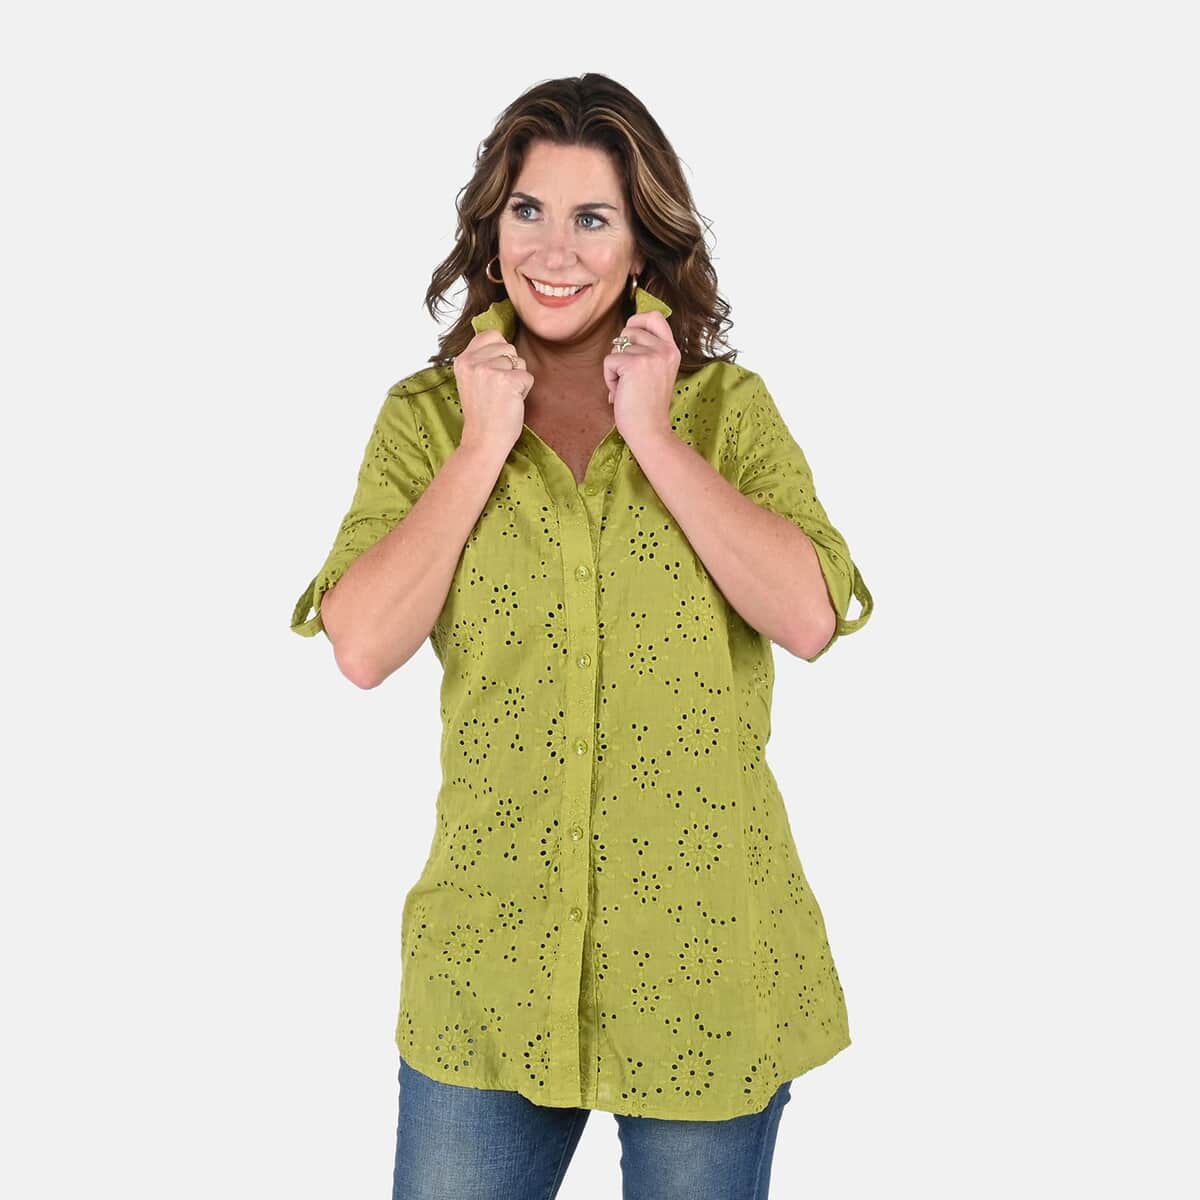 Tamsy Green Erin Eyelet Tunic - 1X image number 3